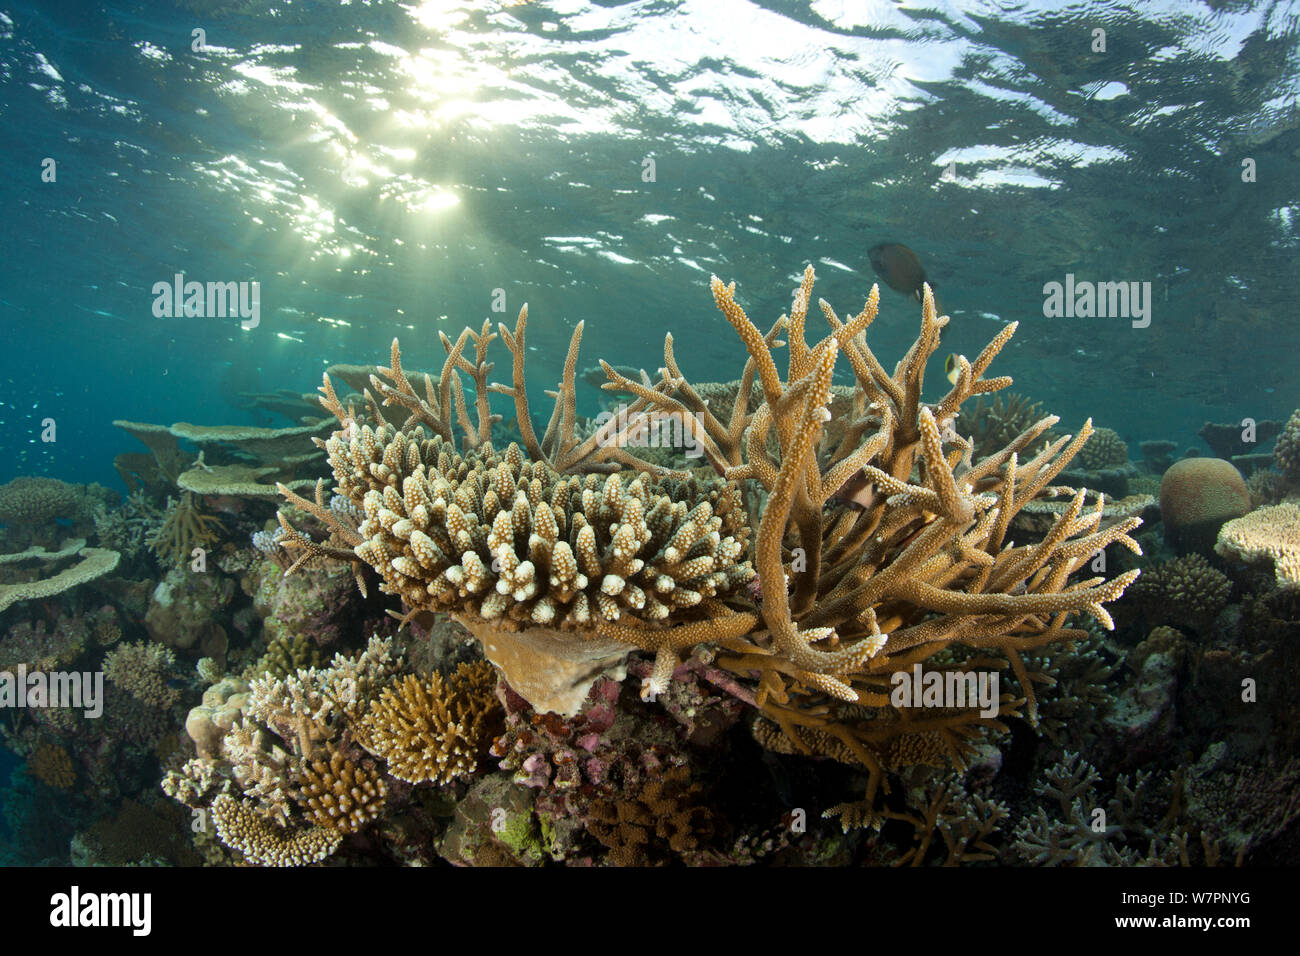 Reef covered with hard corals, Brush Coral (Acropora hyacinthus) Robust Acropora (Acropora robusta) and other Acropora, Maldives, Indian Ocean Stock Photo